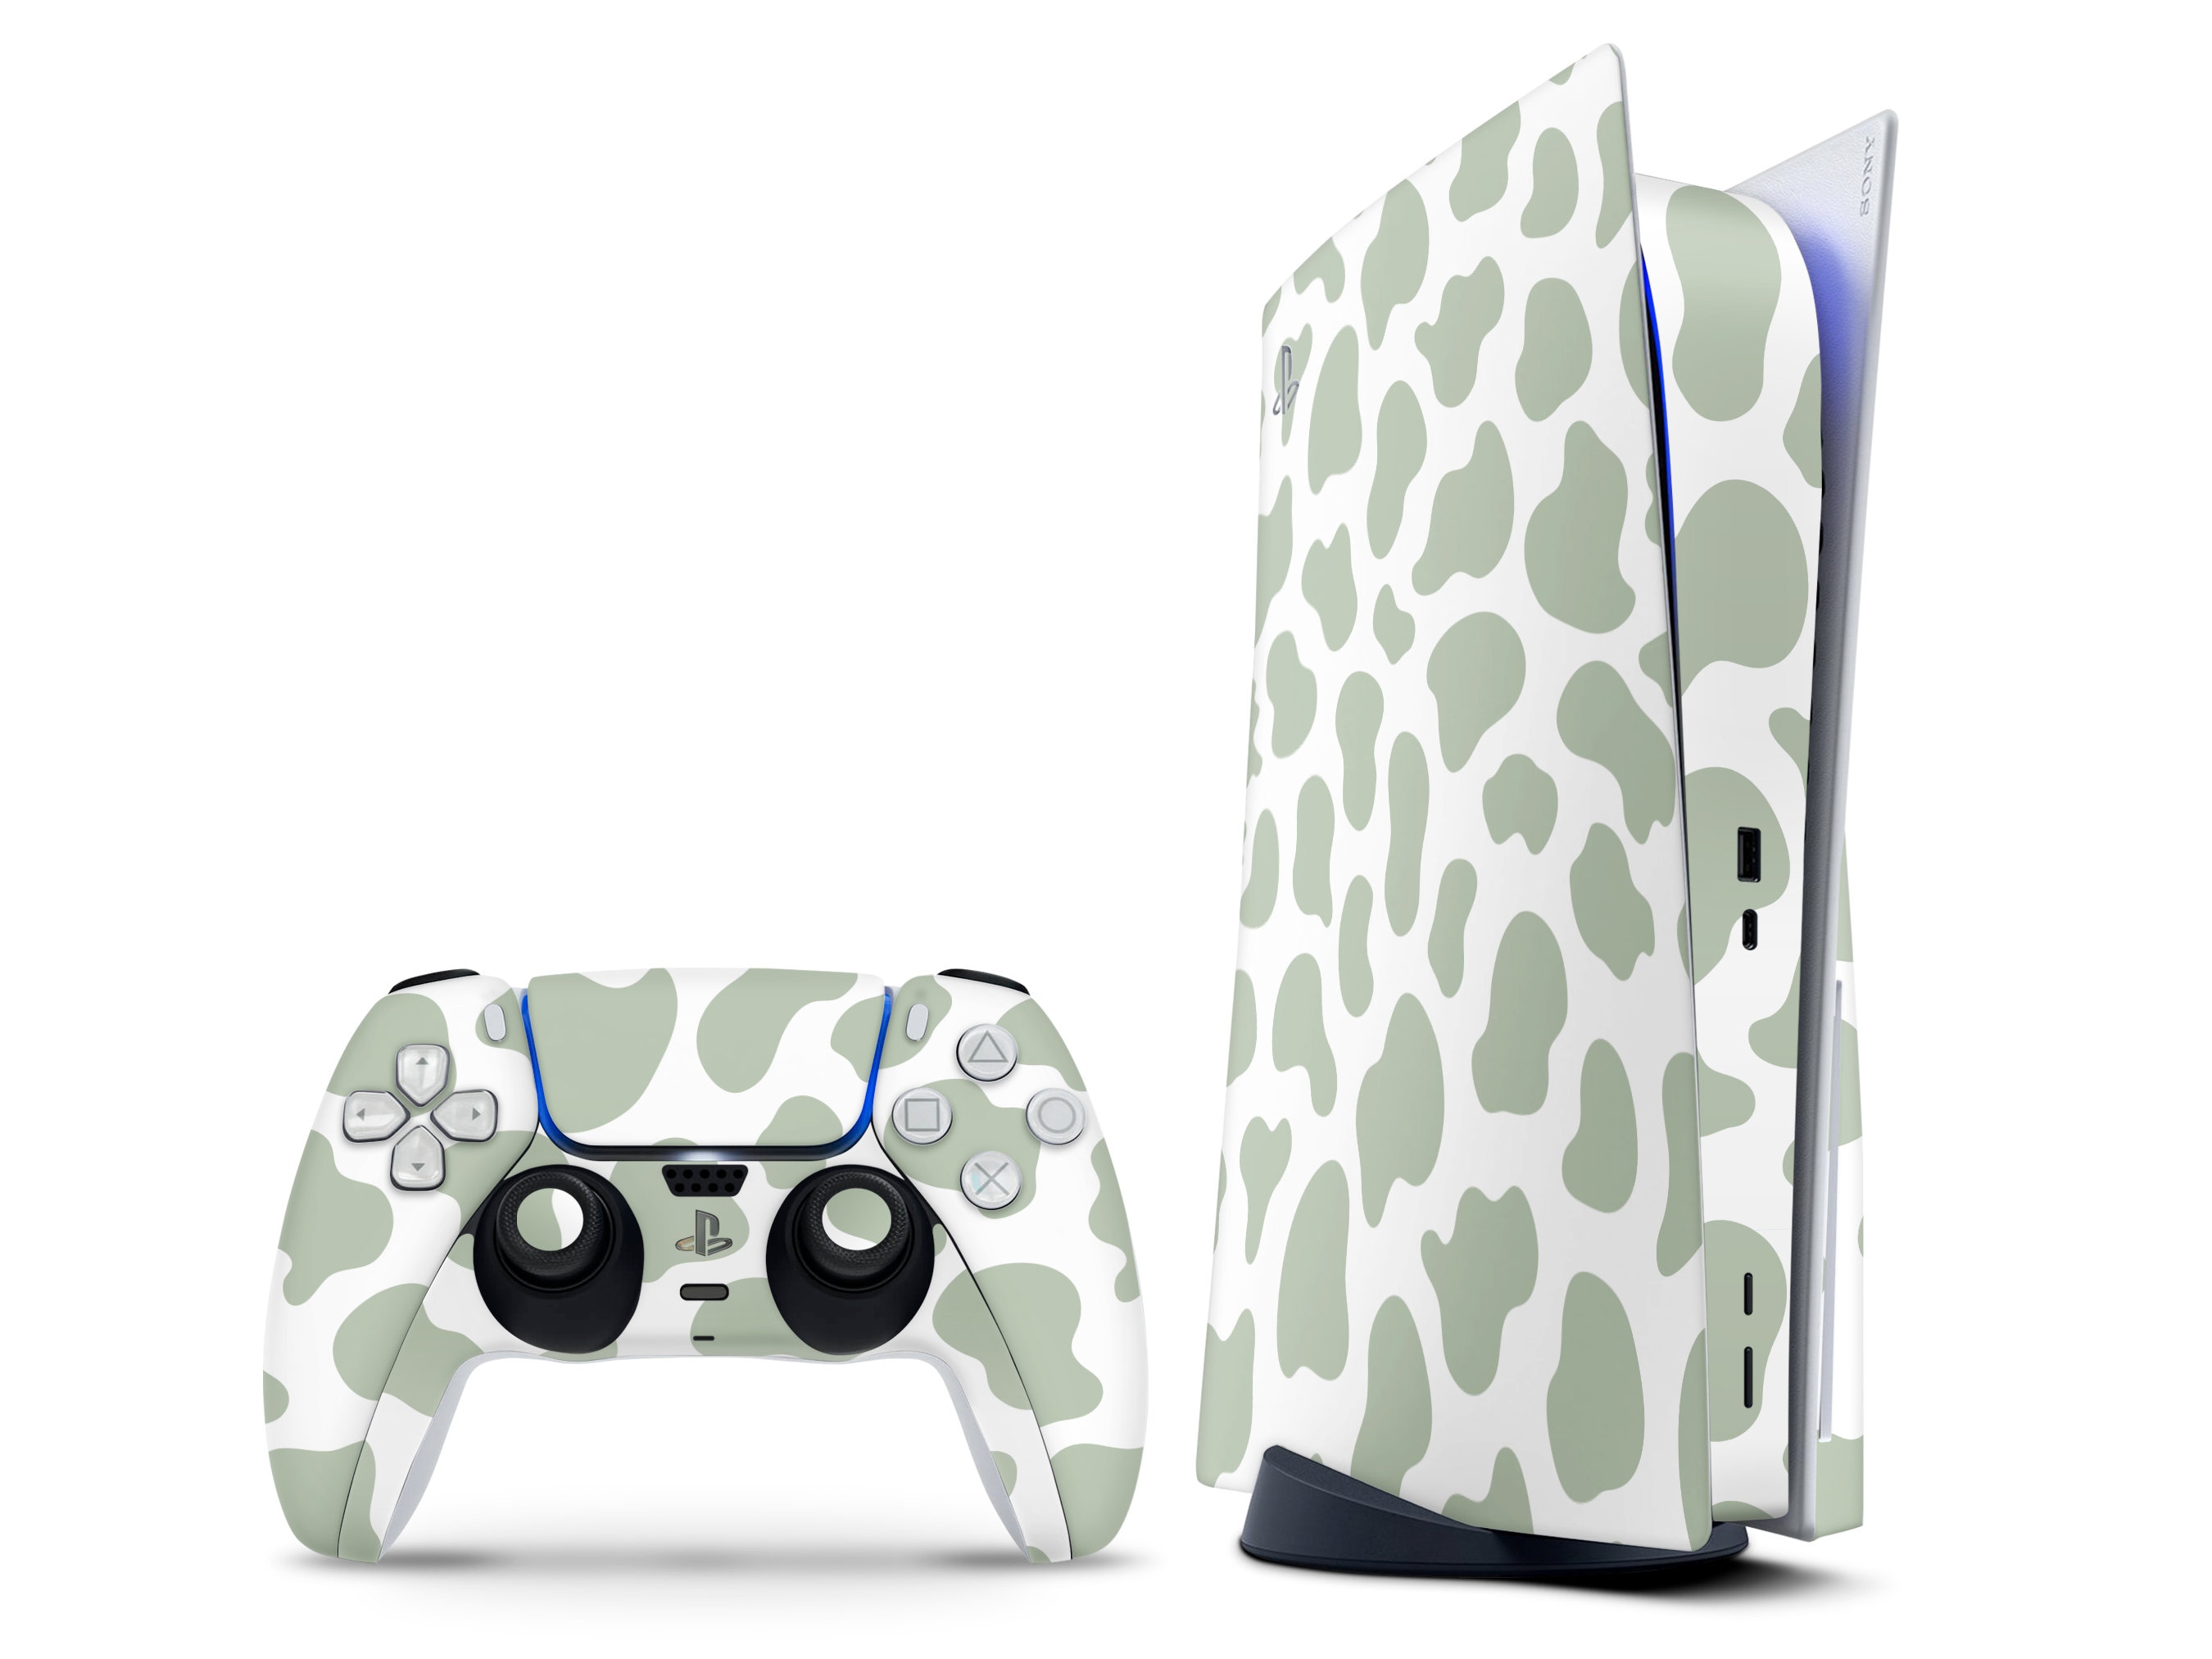 Louis Vuitton Skin Sticker Decal For PS5 Digital Edition And Controllers 